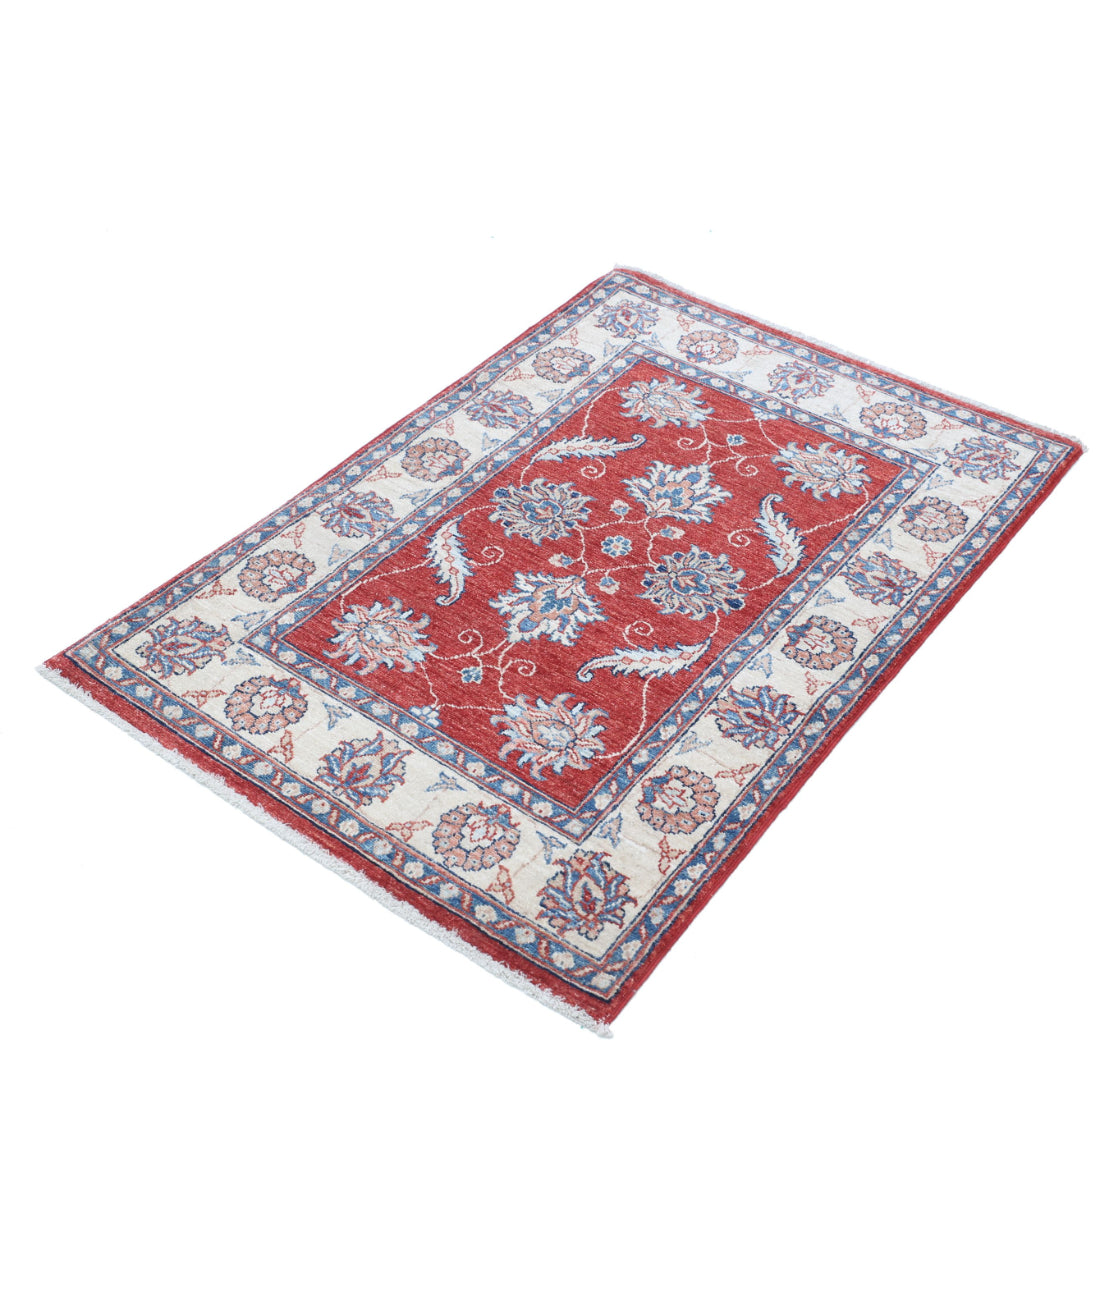 Ziegler 2'8'' X 3'10'' Hand-Knotted Wool Rug 2'8'' x 3'10'' (80 X 115) / Red / Ivory